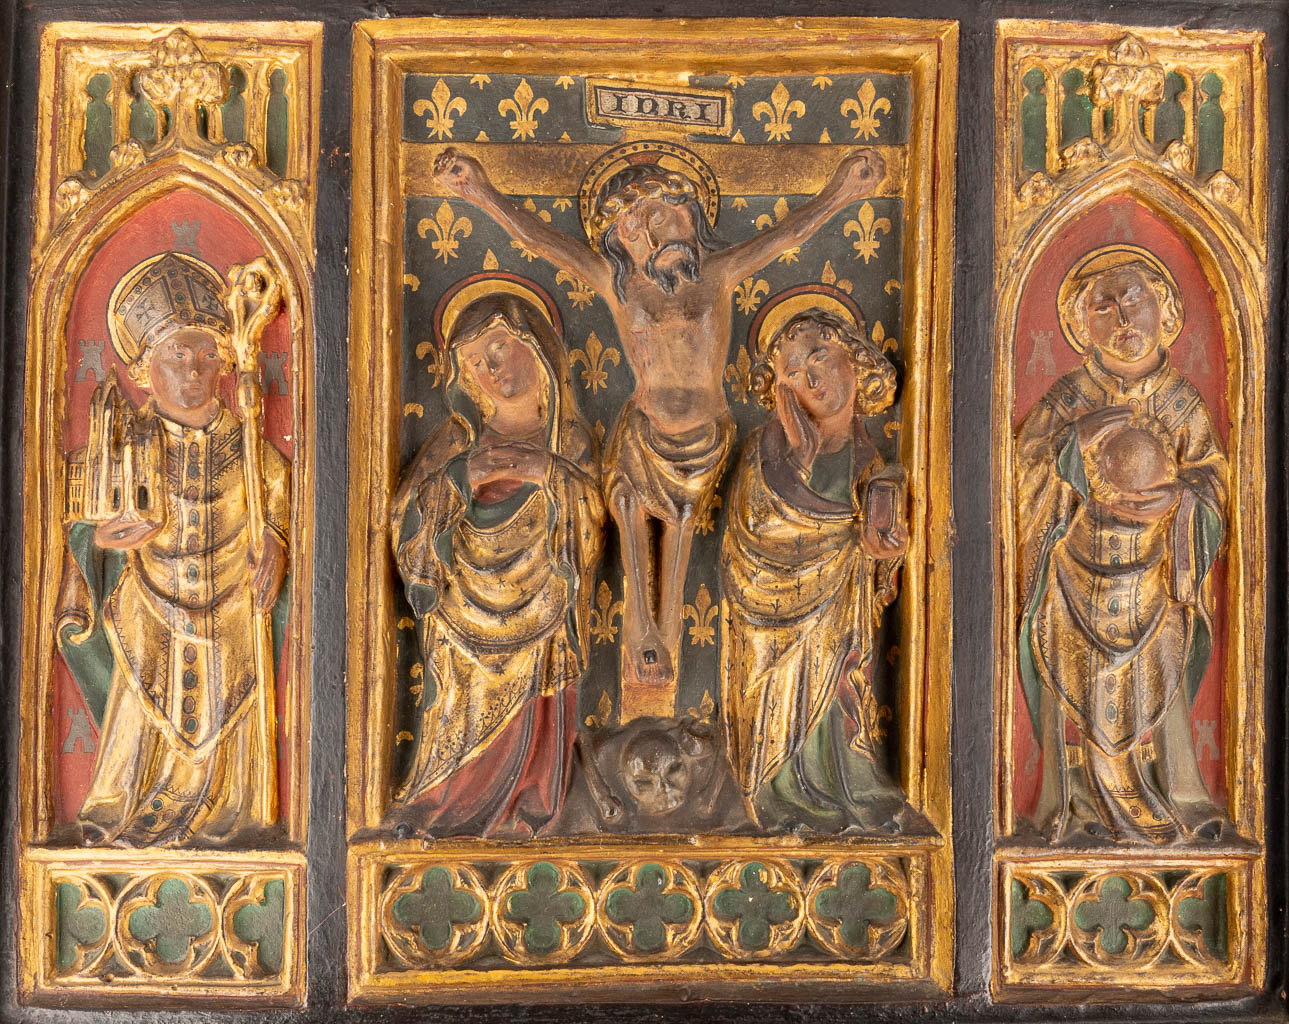 A religious Triptych made of patinated plaster in gothic revival style. 20th C. (W: 46 x H: 37 cm)